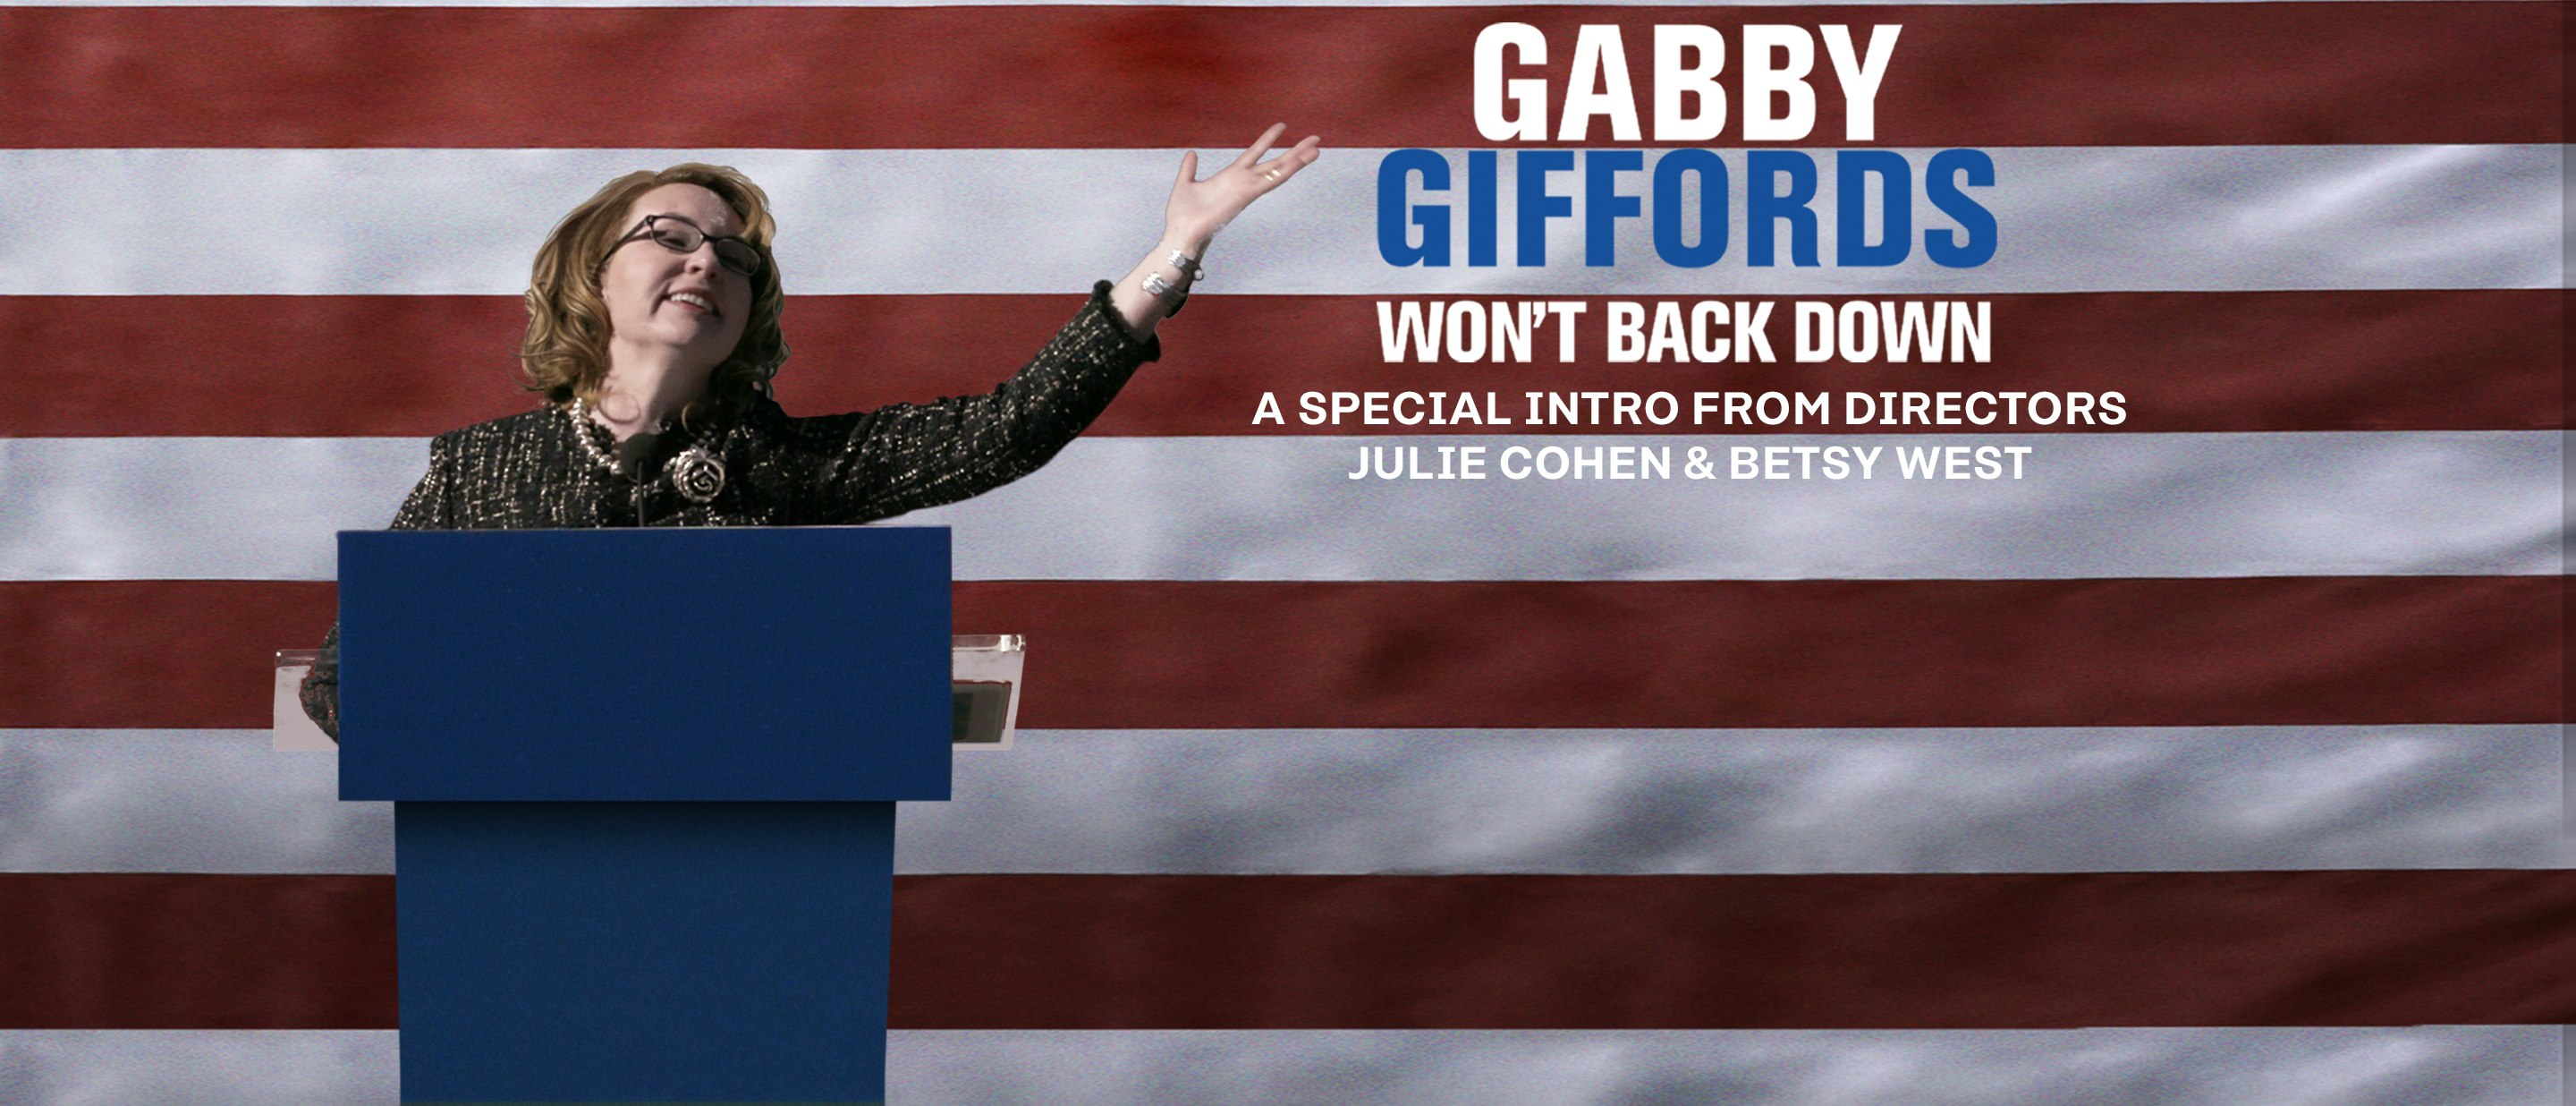 Gabby Giffords Won't Back Down Appearance